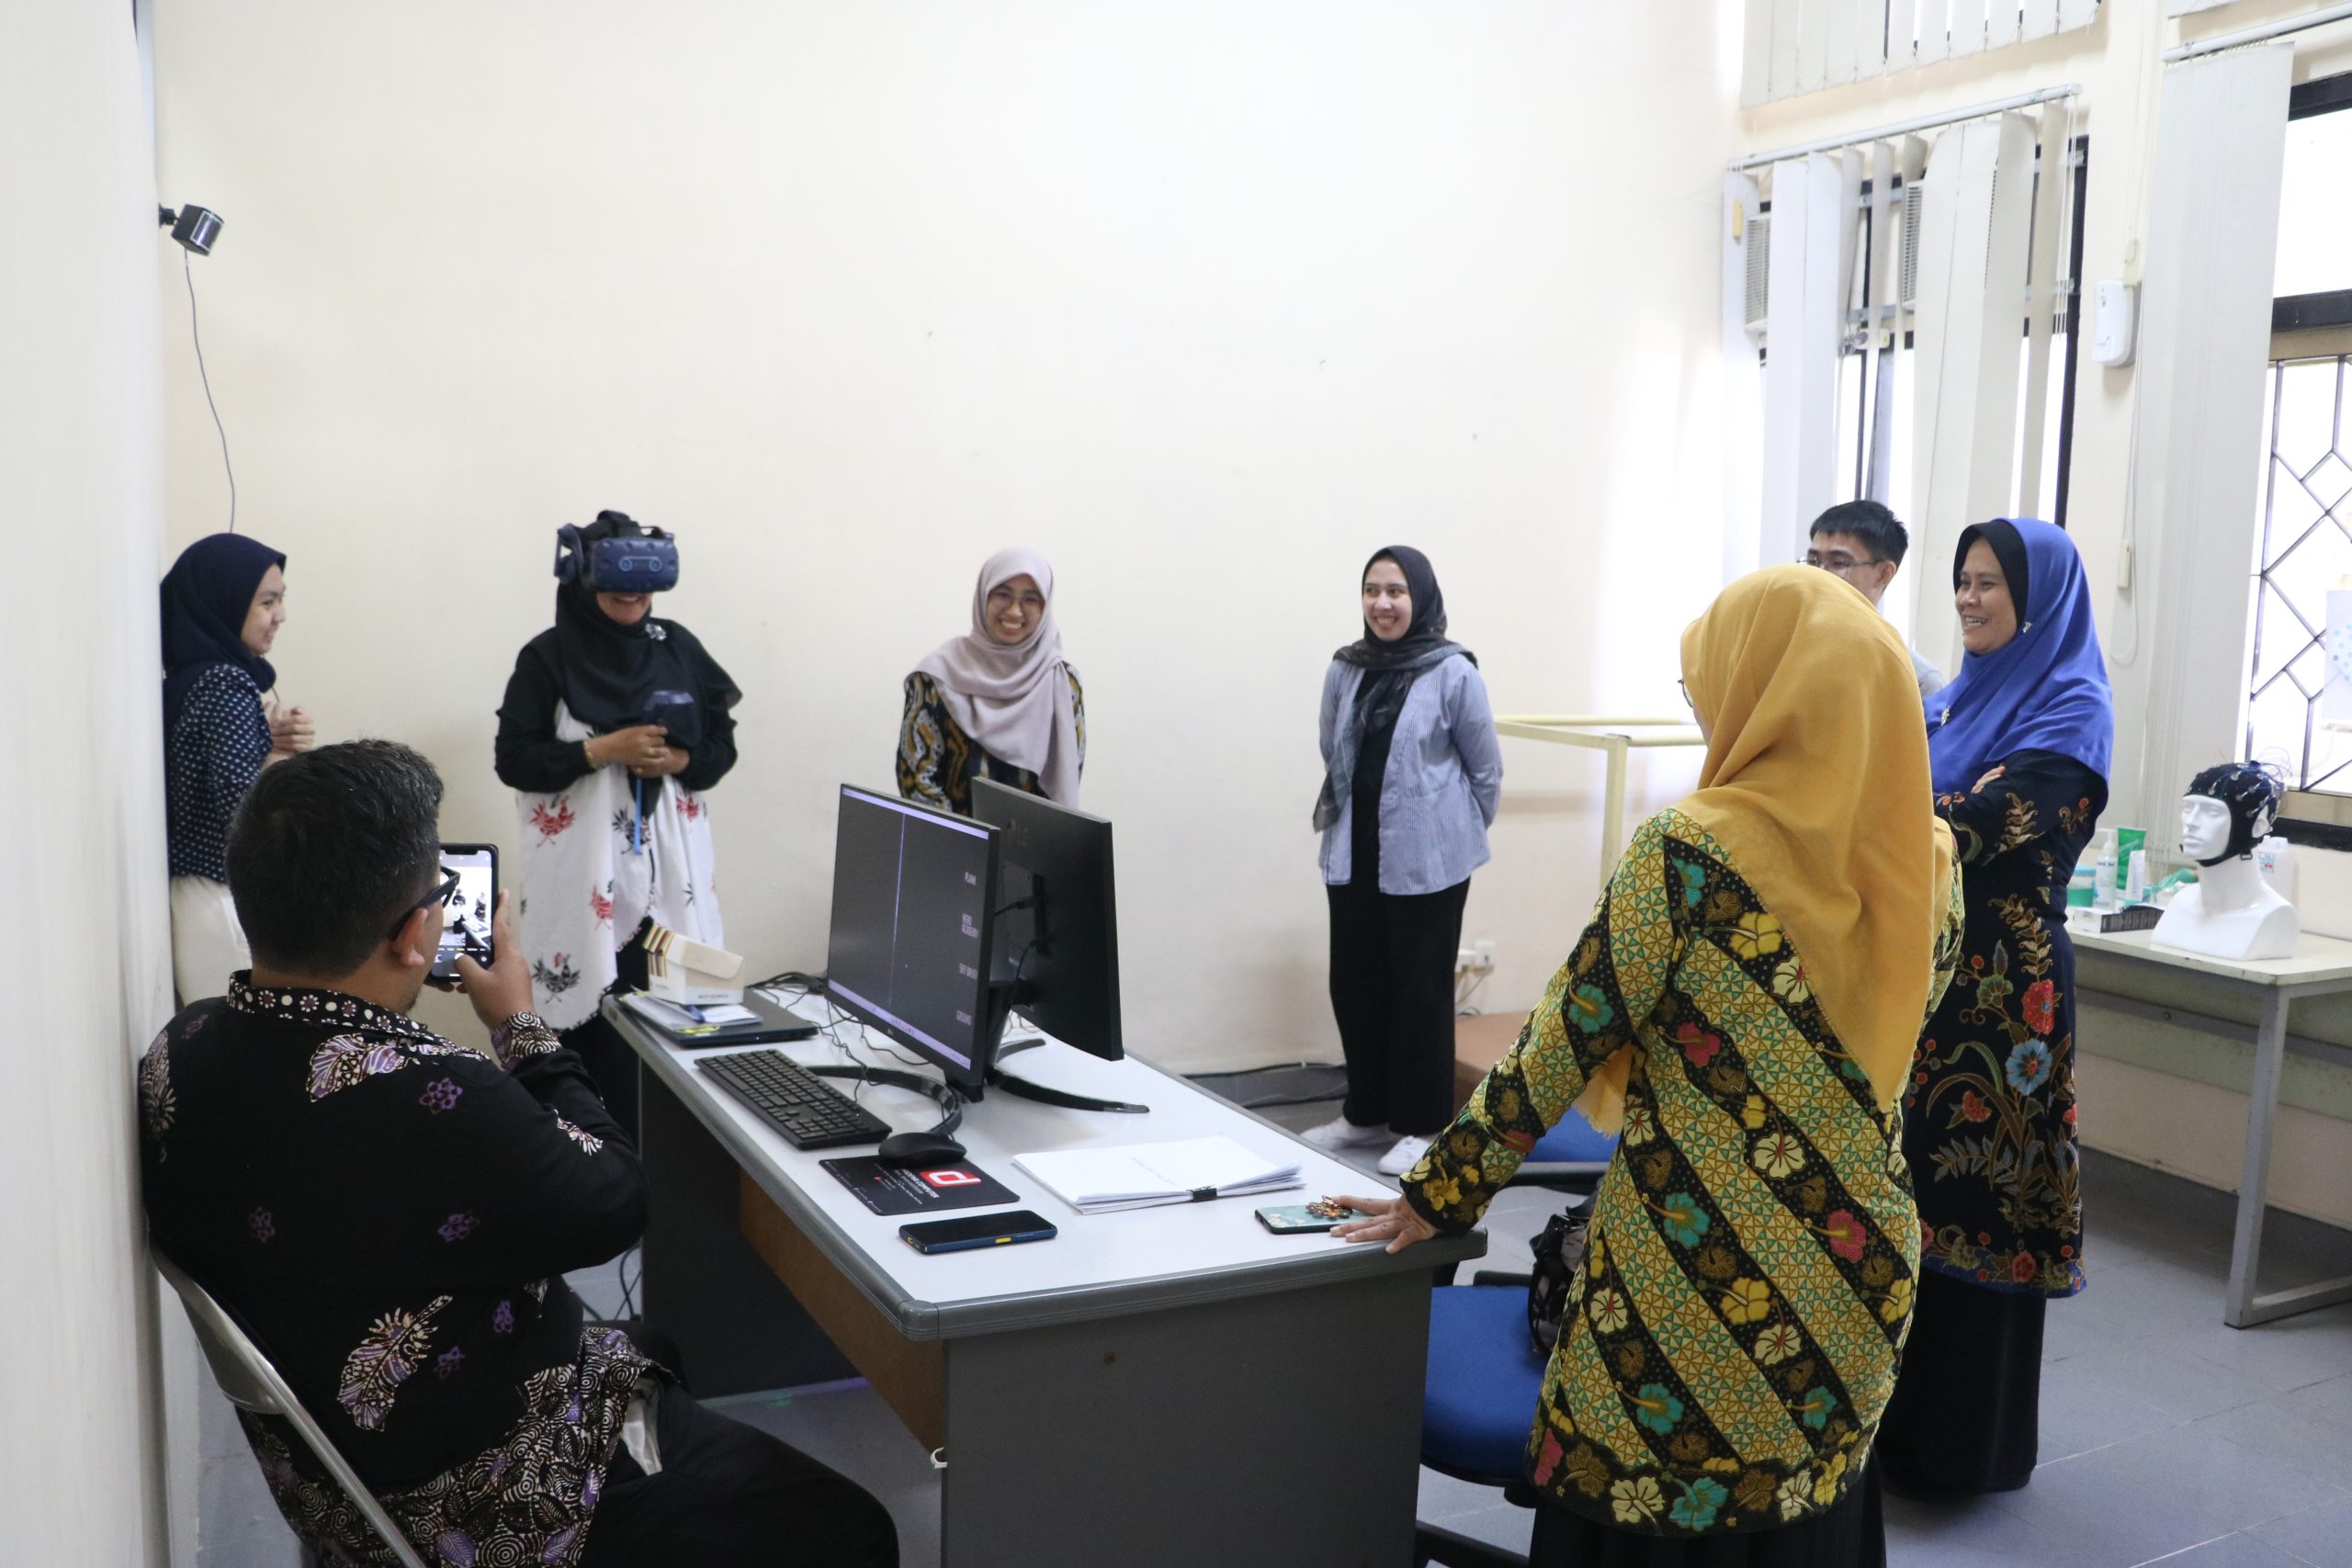 Receiving a Visit from UMS, The Faculty of Psychology UGM Discusses Laboratory Management